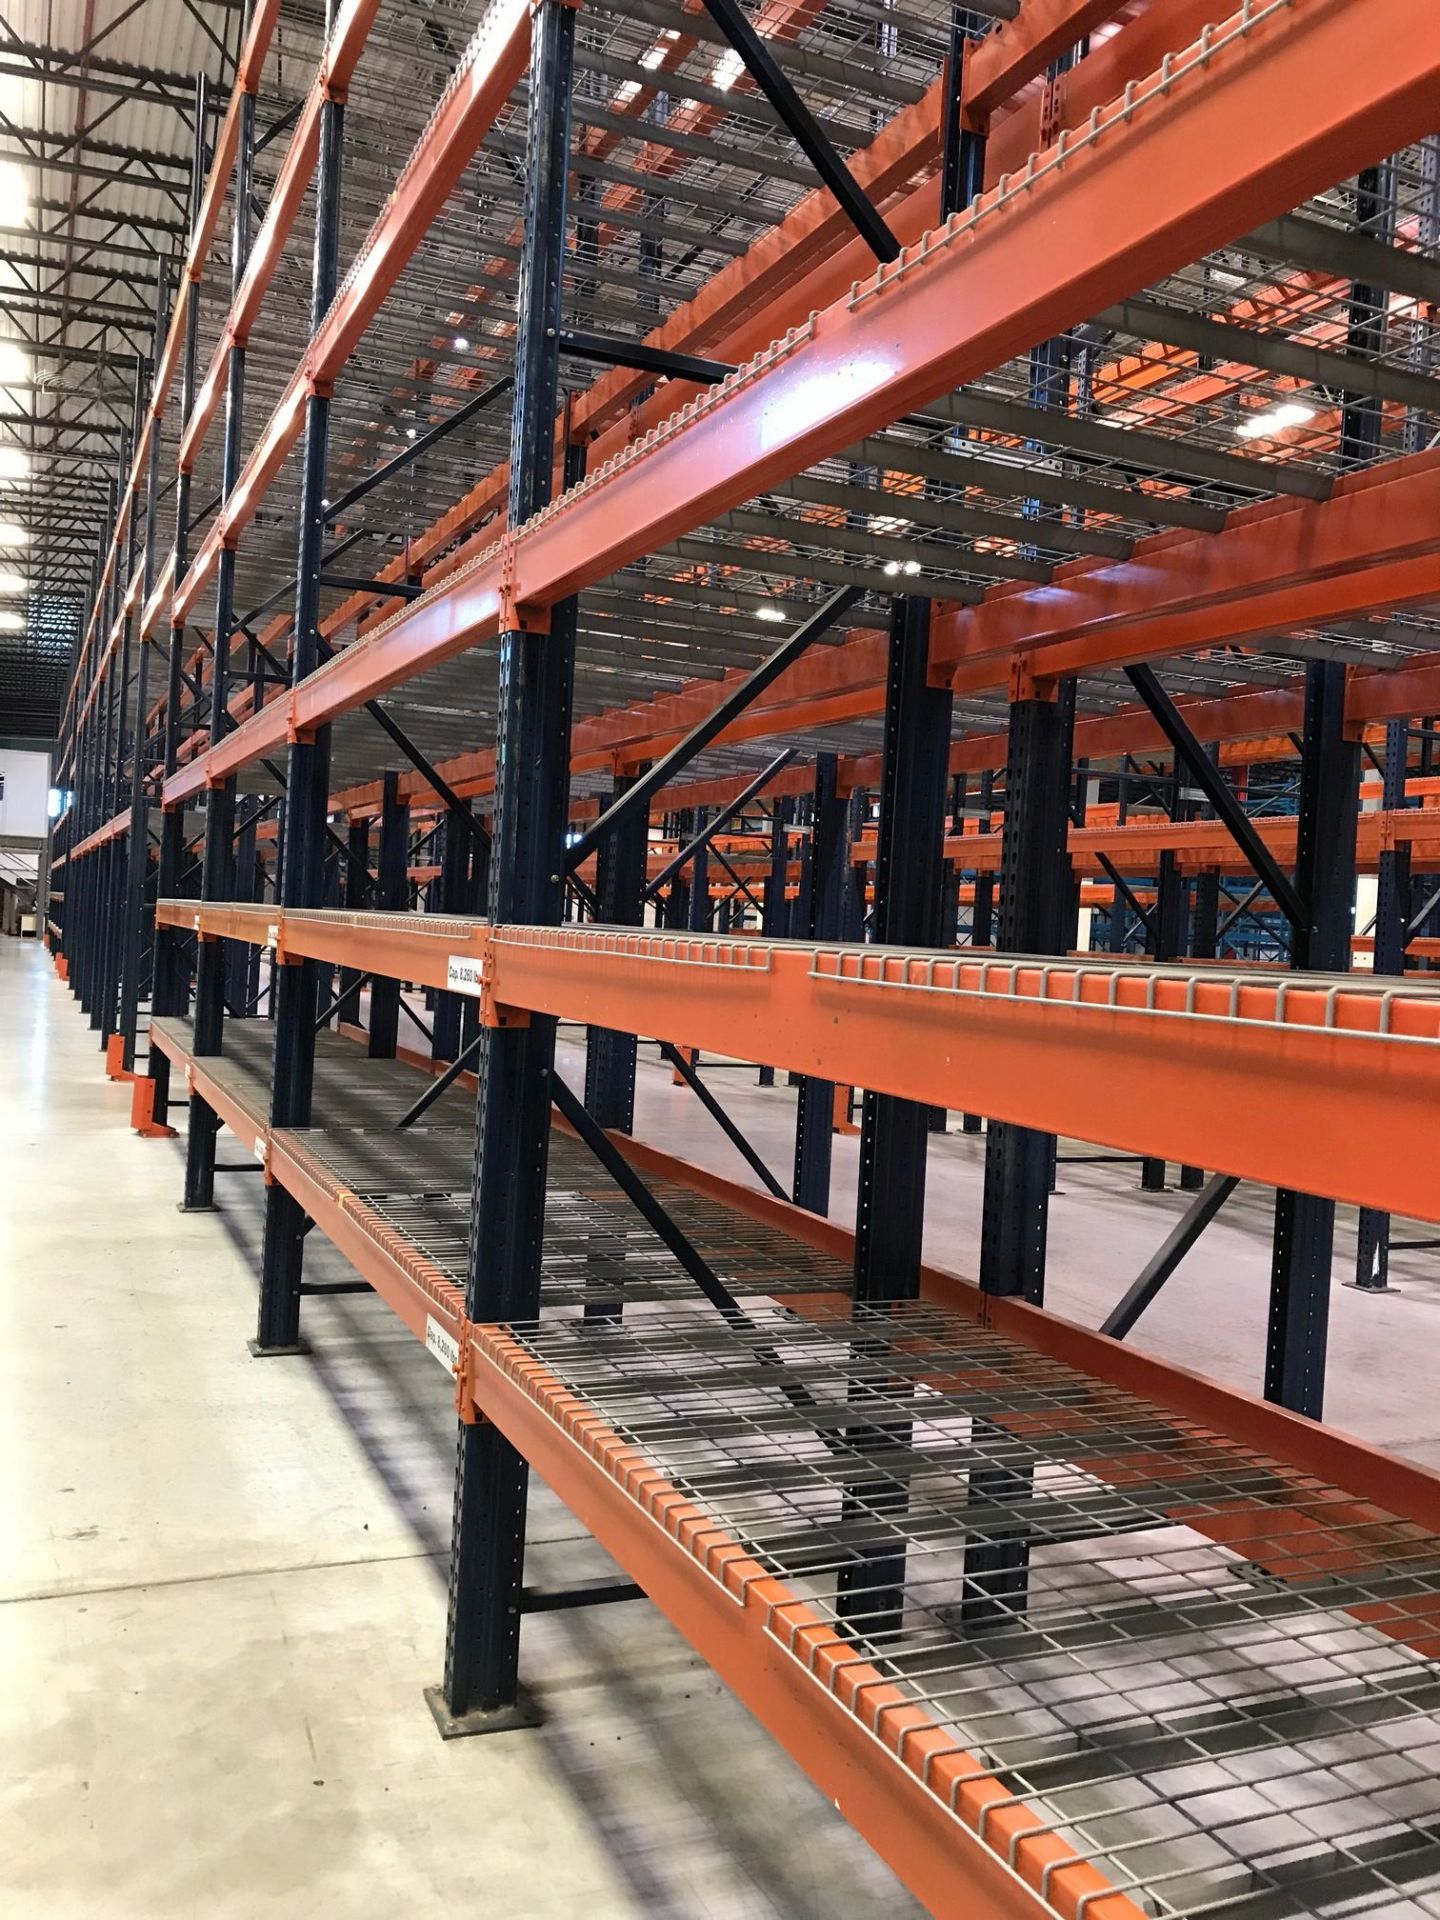 SECTIONS 60" X 108" X 288" TEARDROP TYPE ADJUSTABLE BEAM PALLET RACK WITH WIRE DECKING, 6" HIGH - Image 5 of 11